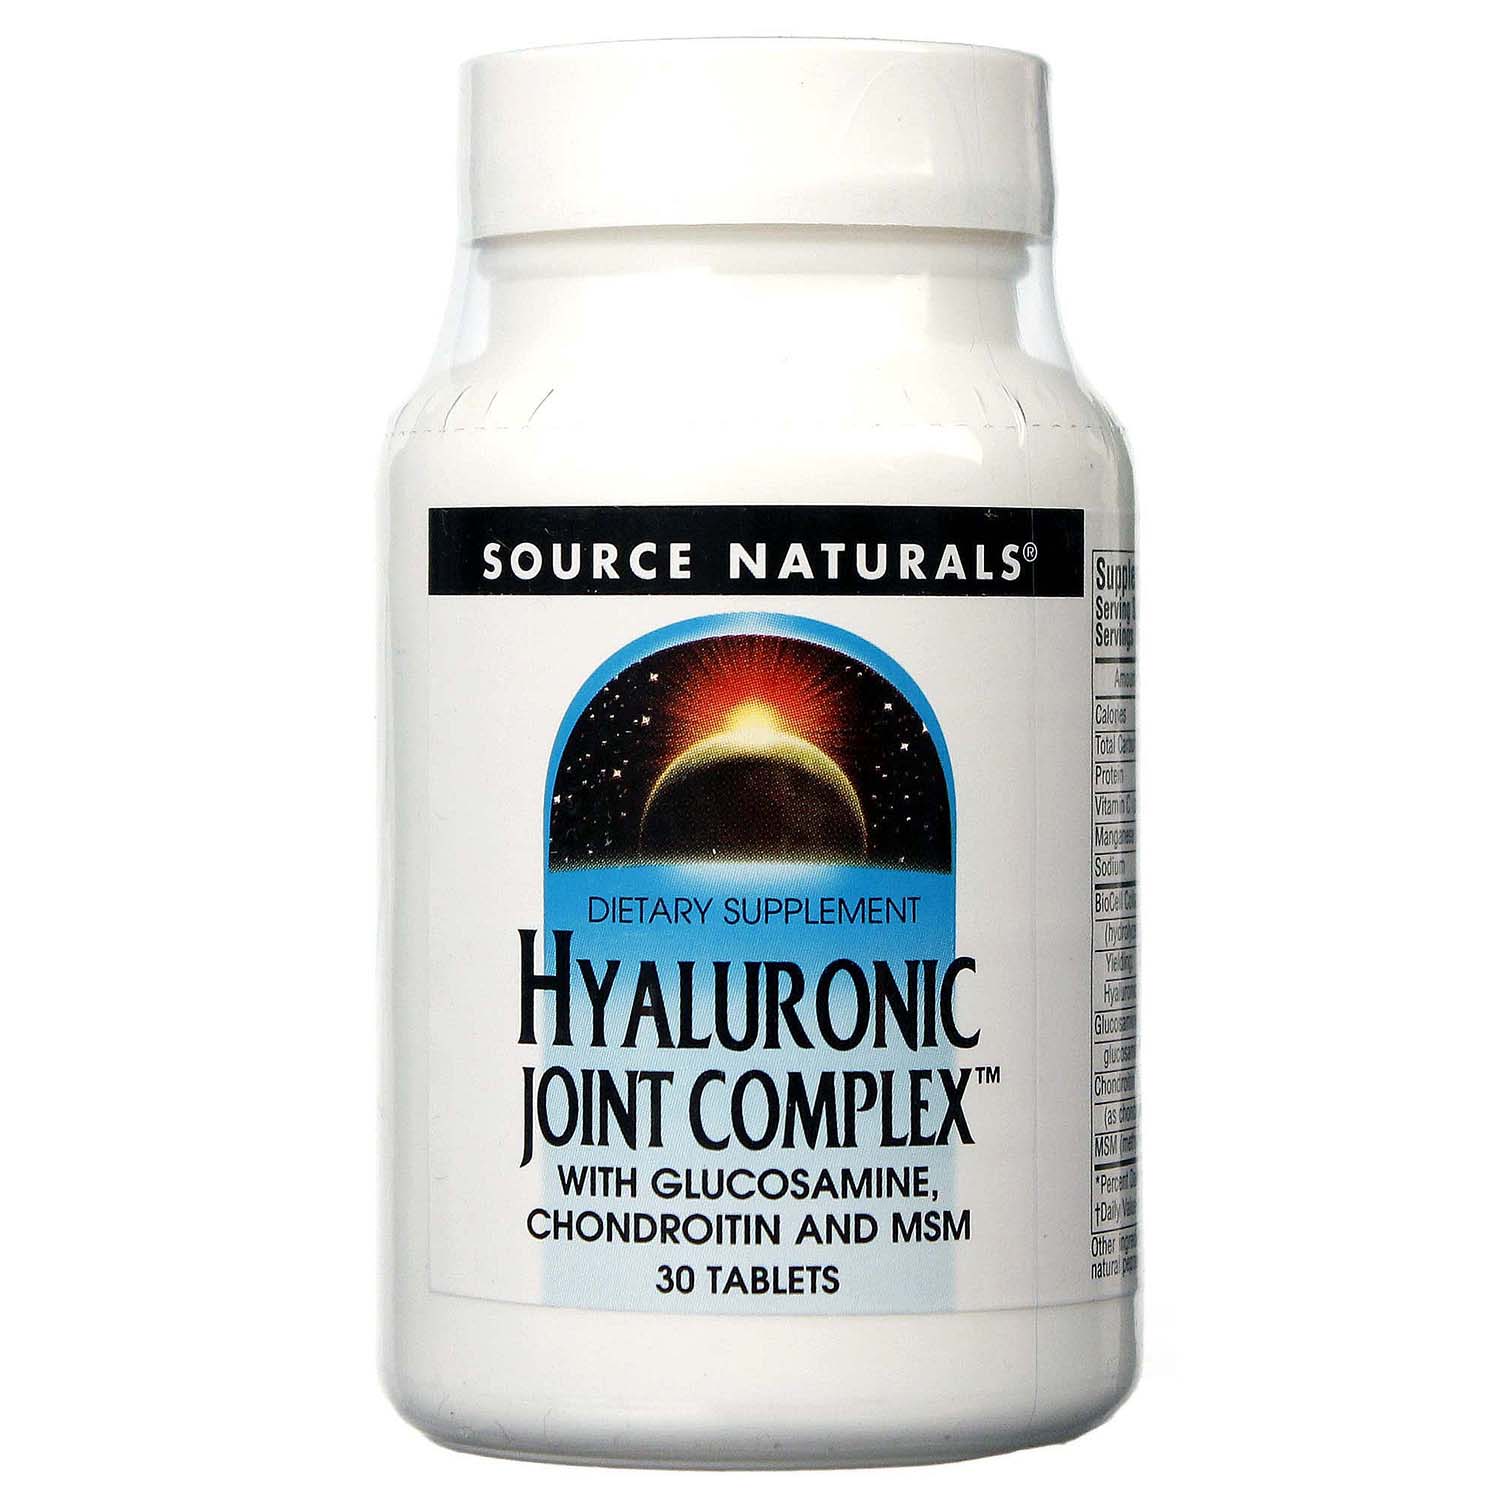 Source Naturals Hyaluronic Joint Complex, 30 Tablets